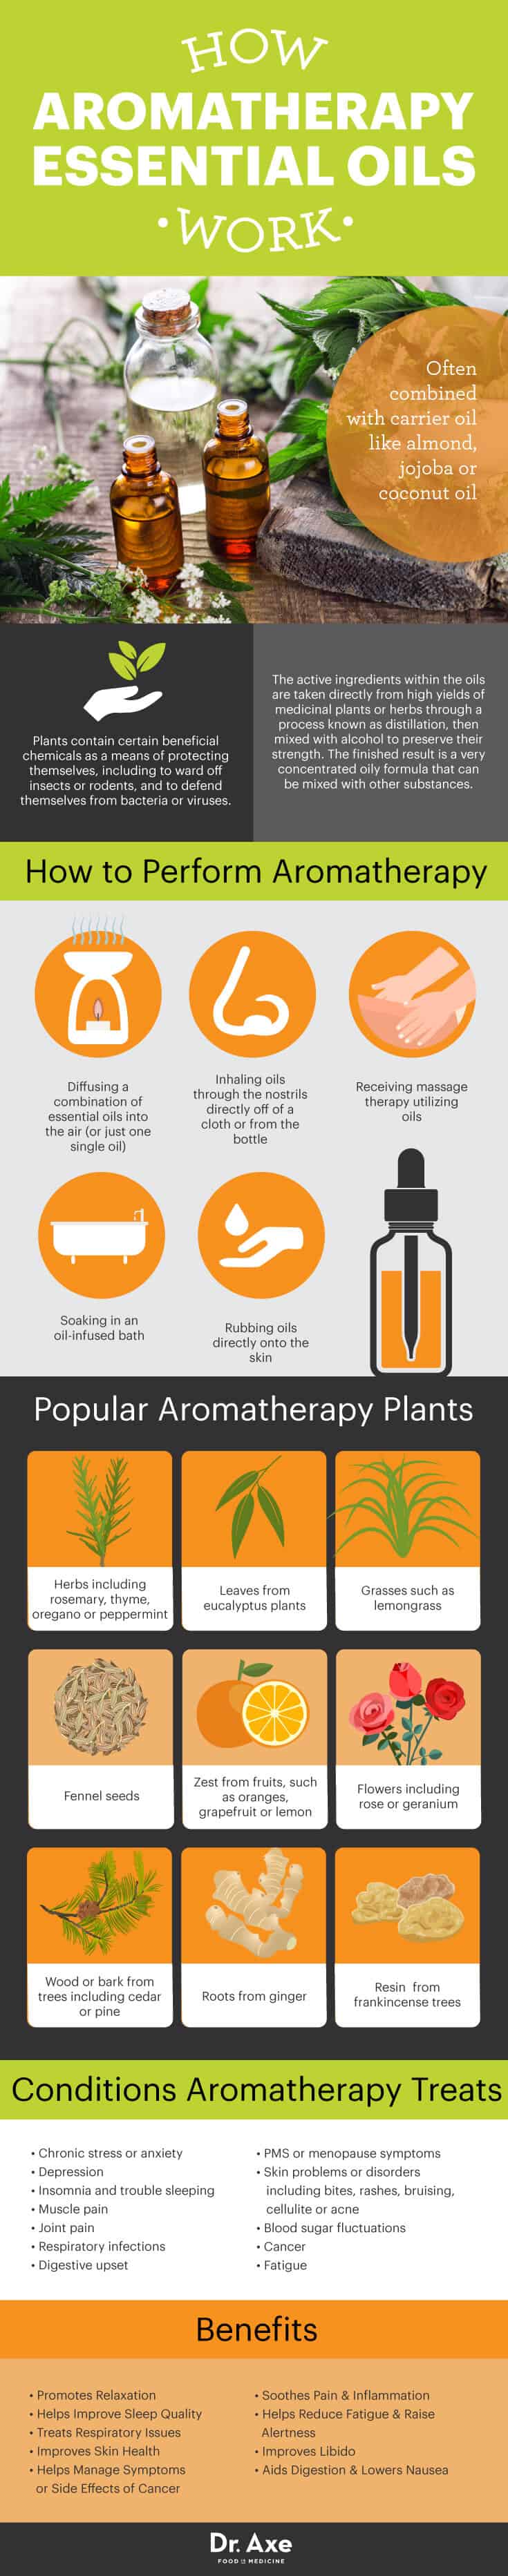 How aromatherapy essential oils work - Dr. Axe